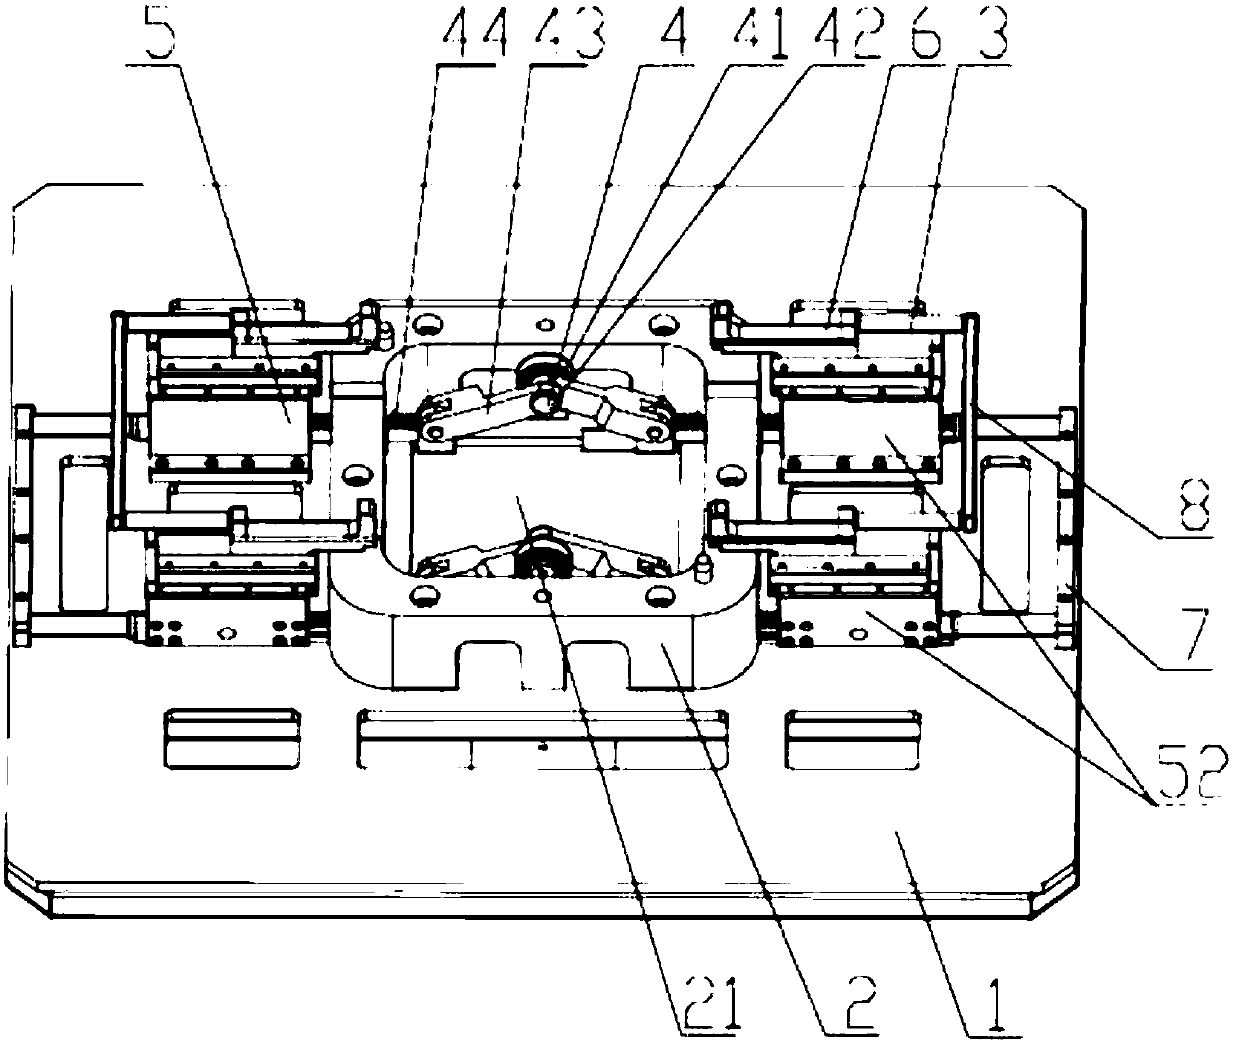 Positioning device for gear mechanism